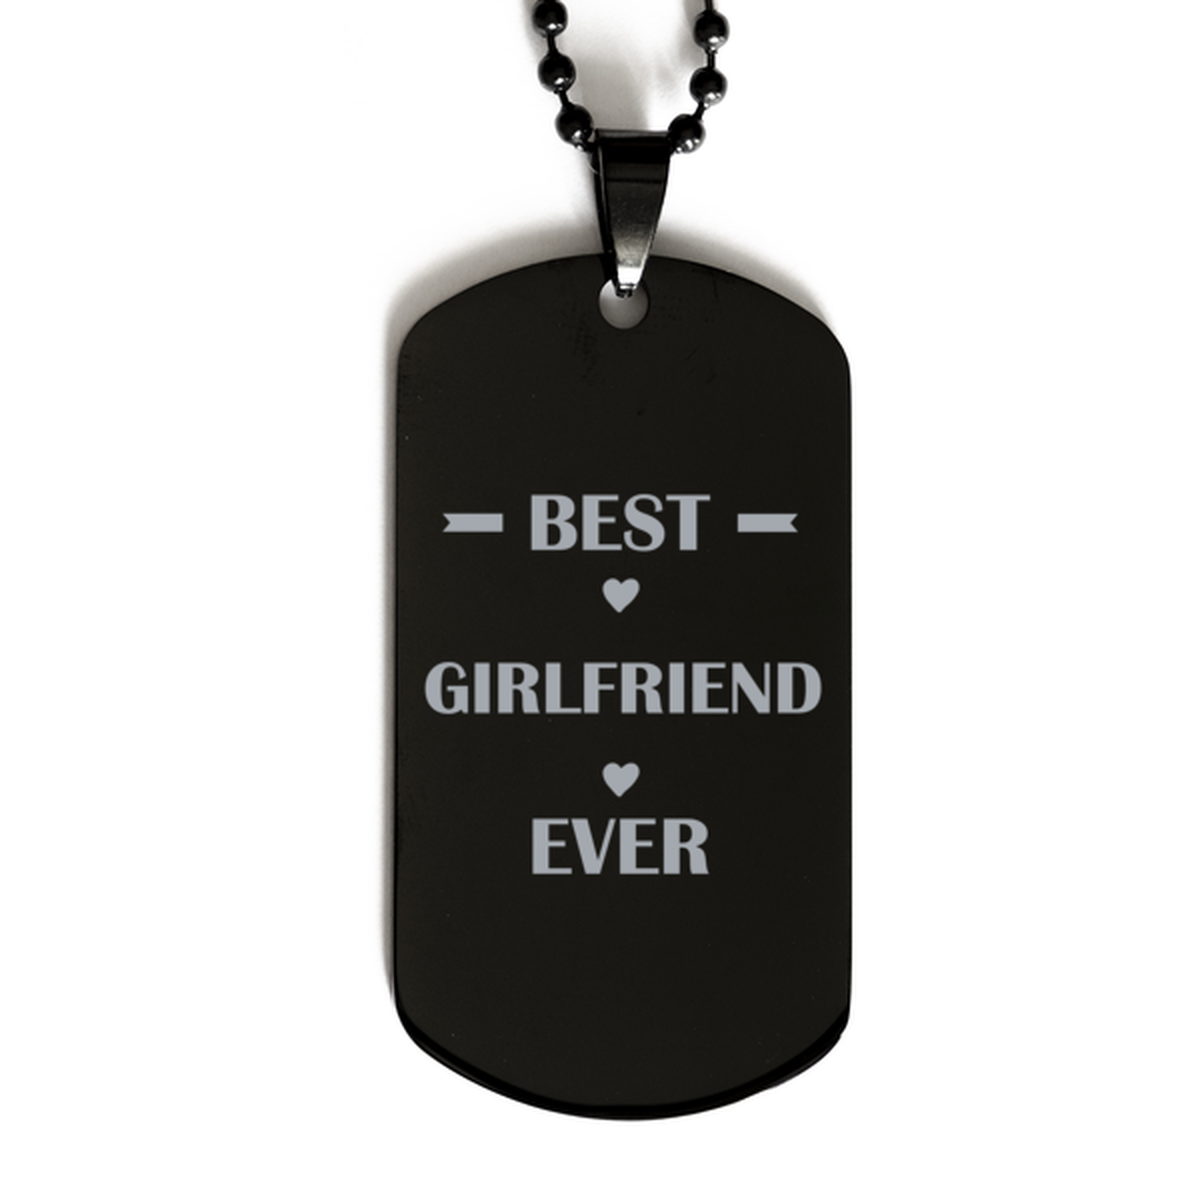 Best Girlfriend Ever Girlfriend Gifts, Funny Black Dog Tag For Girlfriend, Birthday Family Presents Engraved Necklace For Women